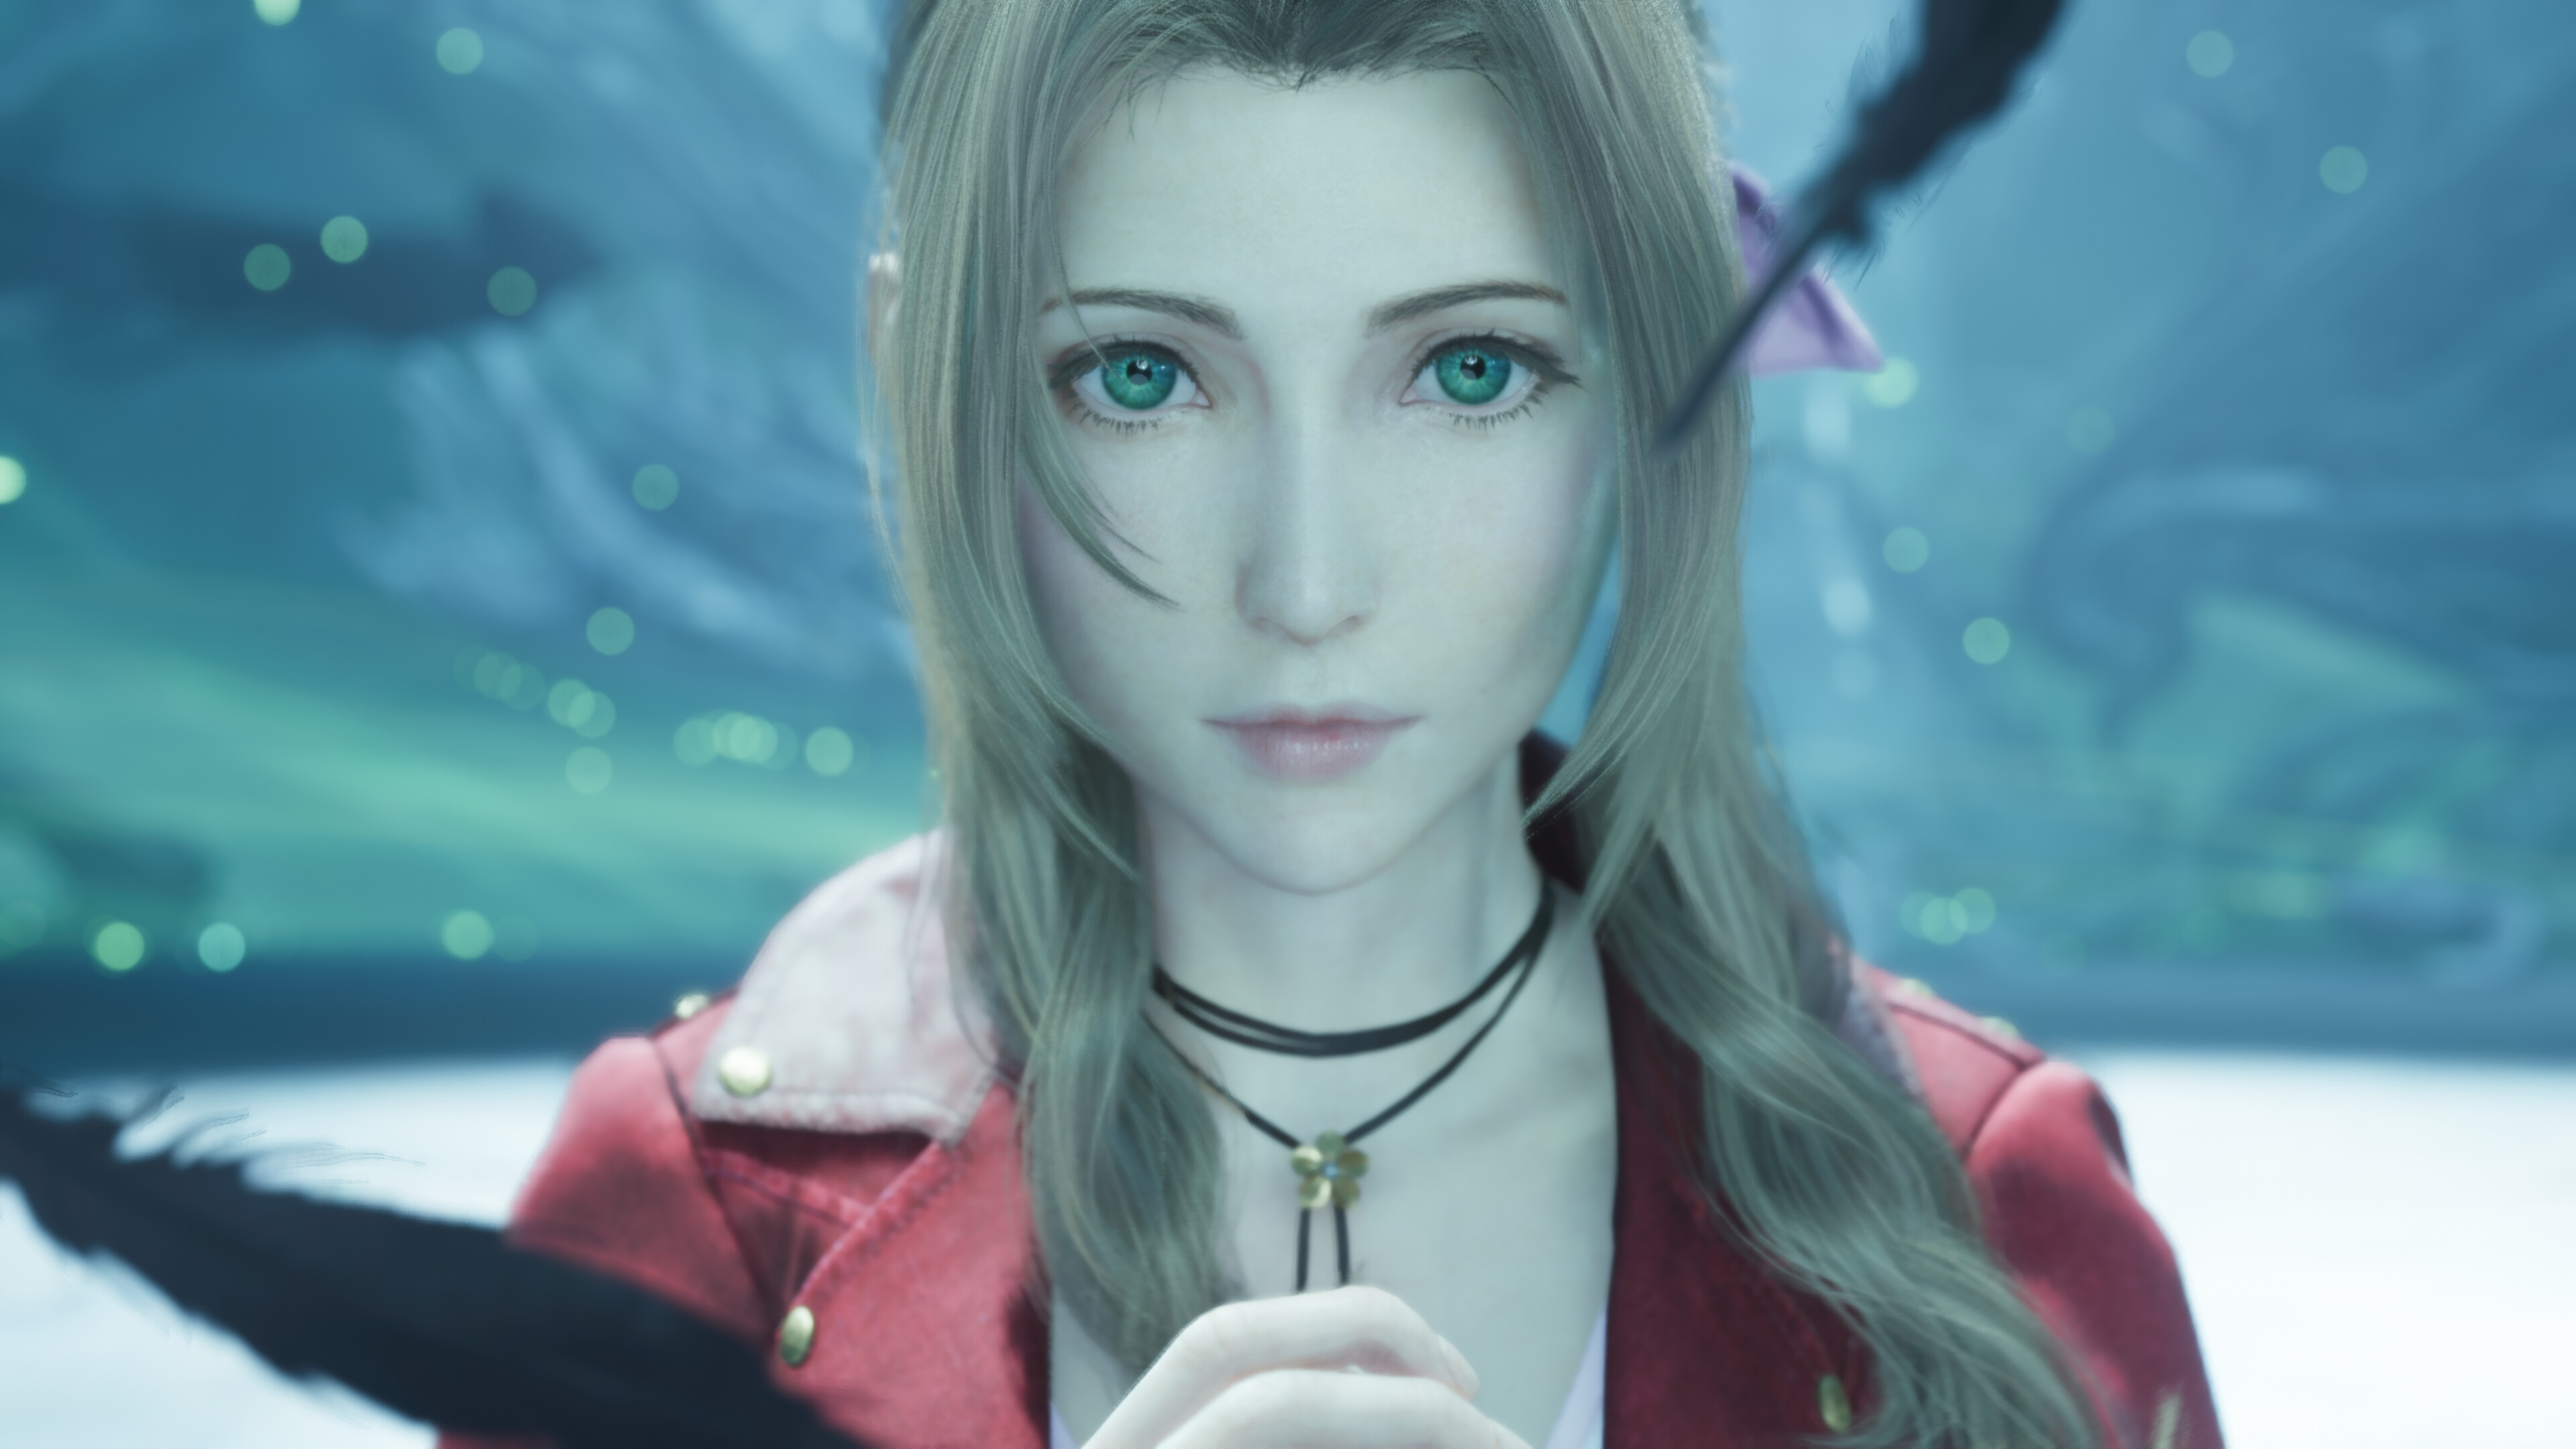 FFVII Rebirth Developers Discuss the Fate and Possible Death of Aerith